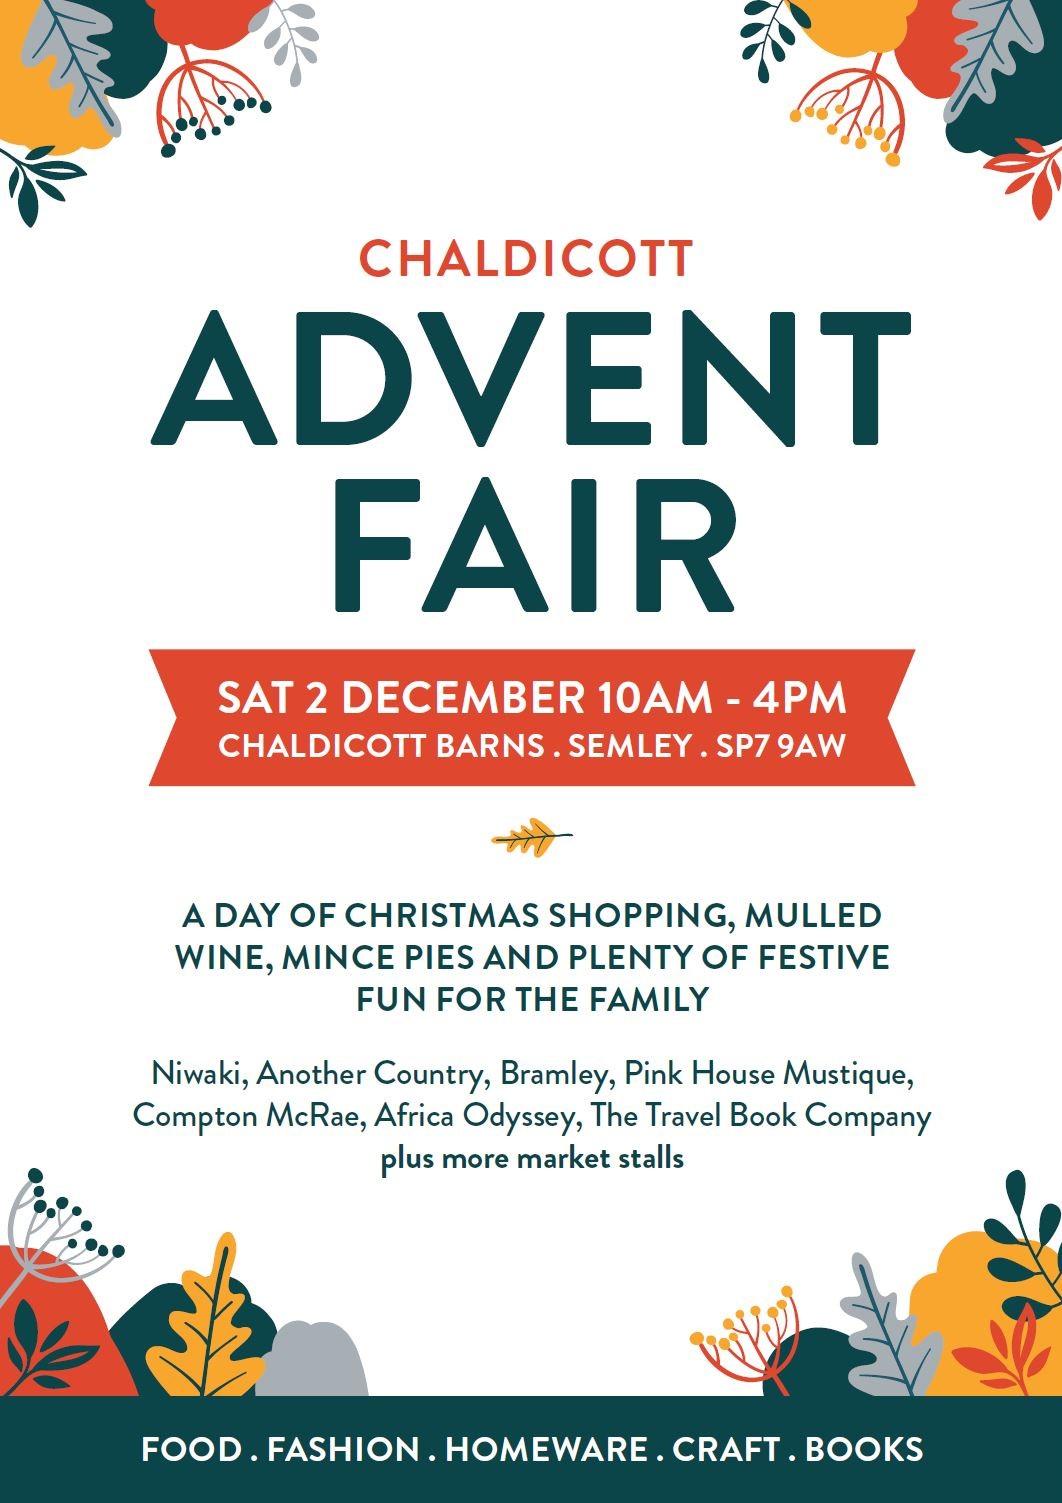 Visit Africa Odyssey at The Chaldicott Advent Fayre